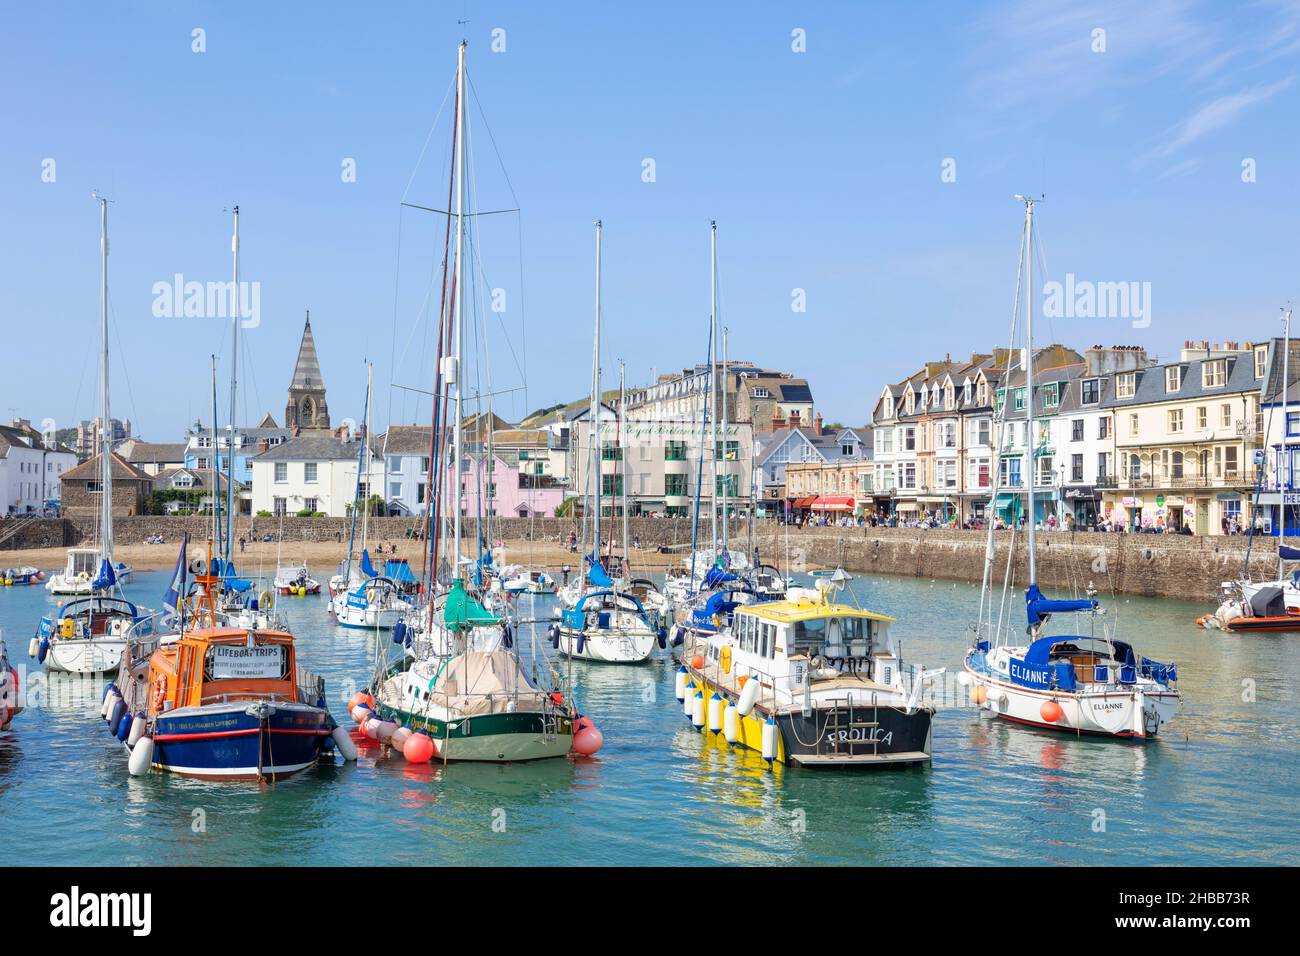 Ilfracombe beach and The Quay behind the fishing boats and yachts in the harbour in the town of Ilfracombe Devon England UK GB Europe Stock Photo